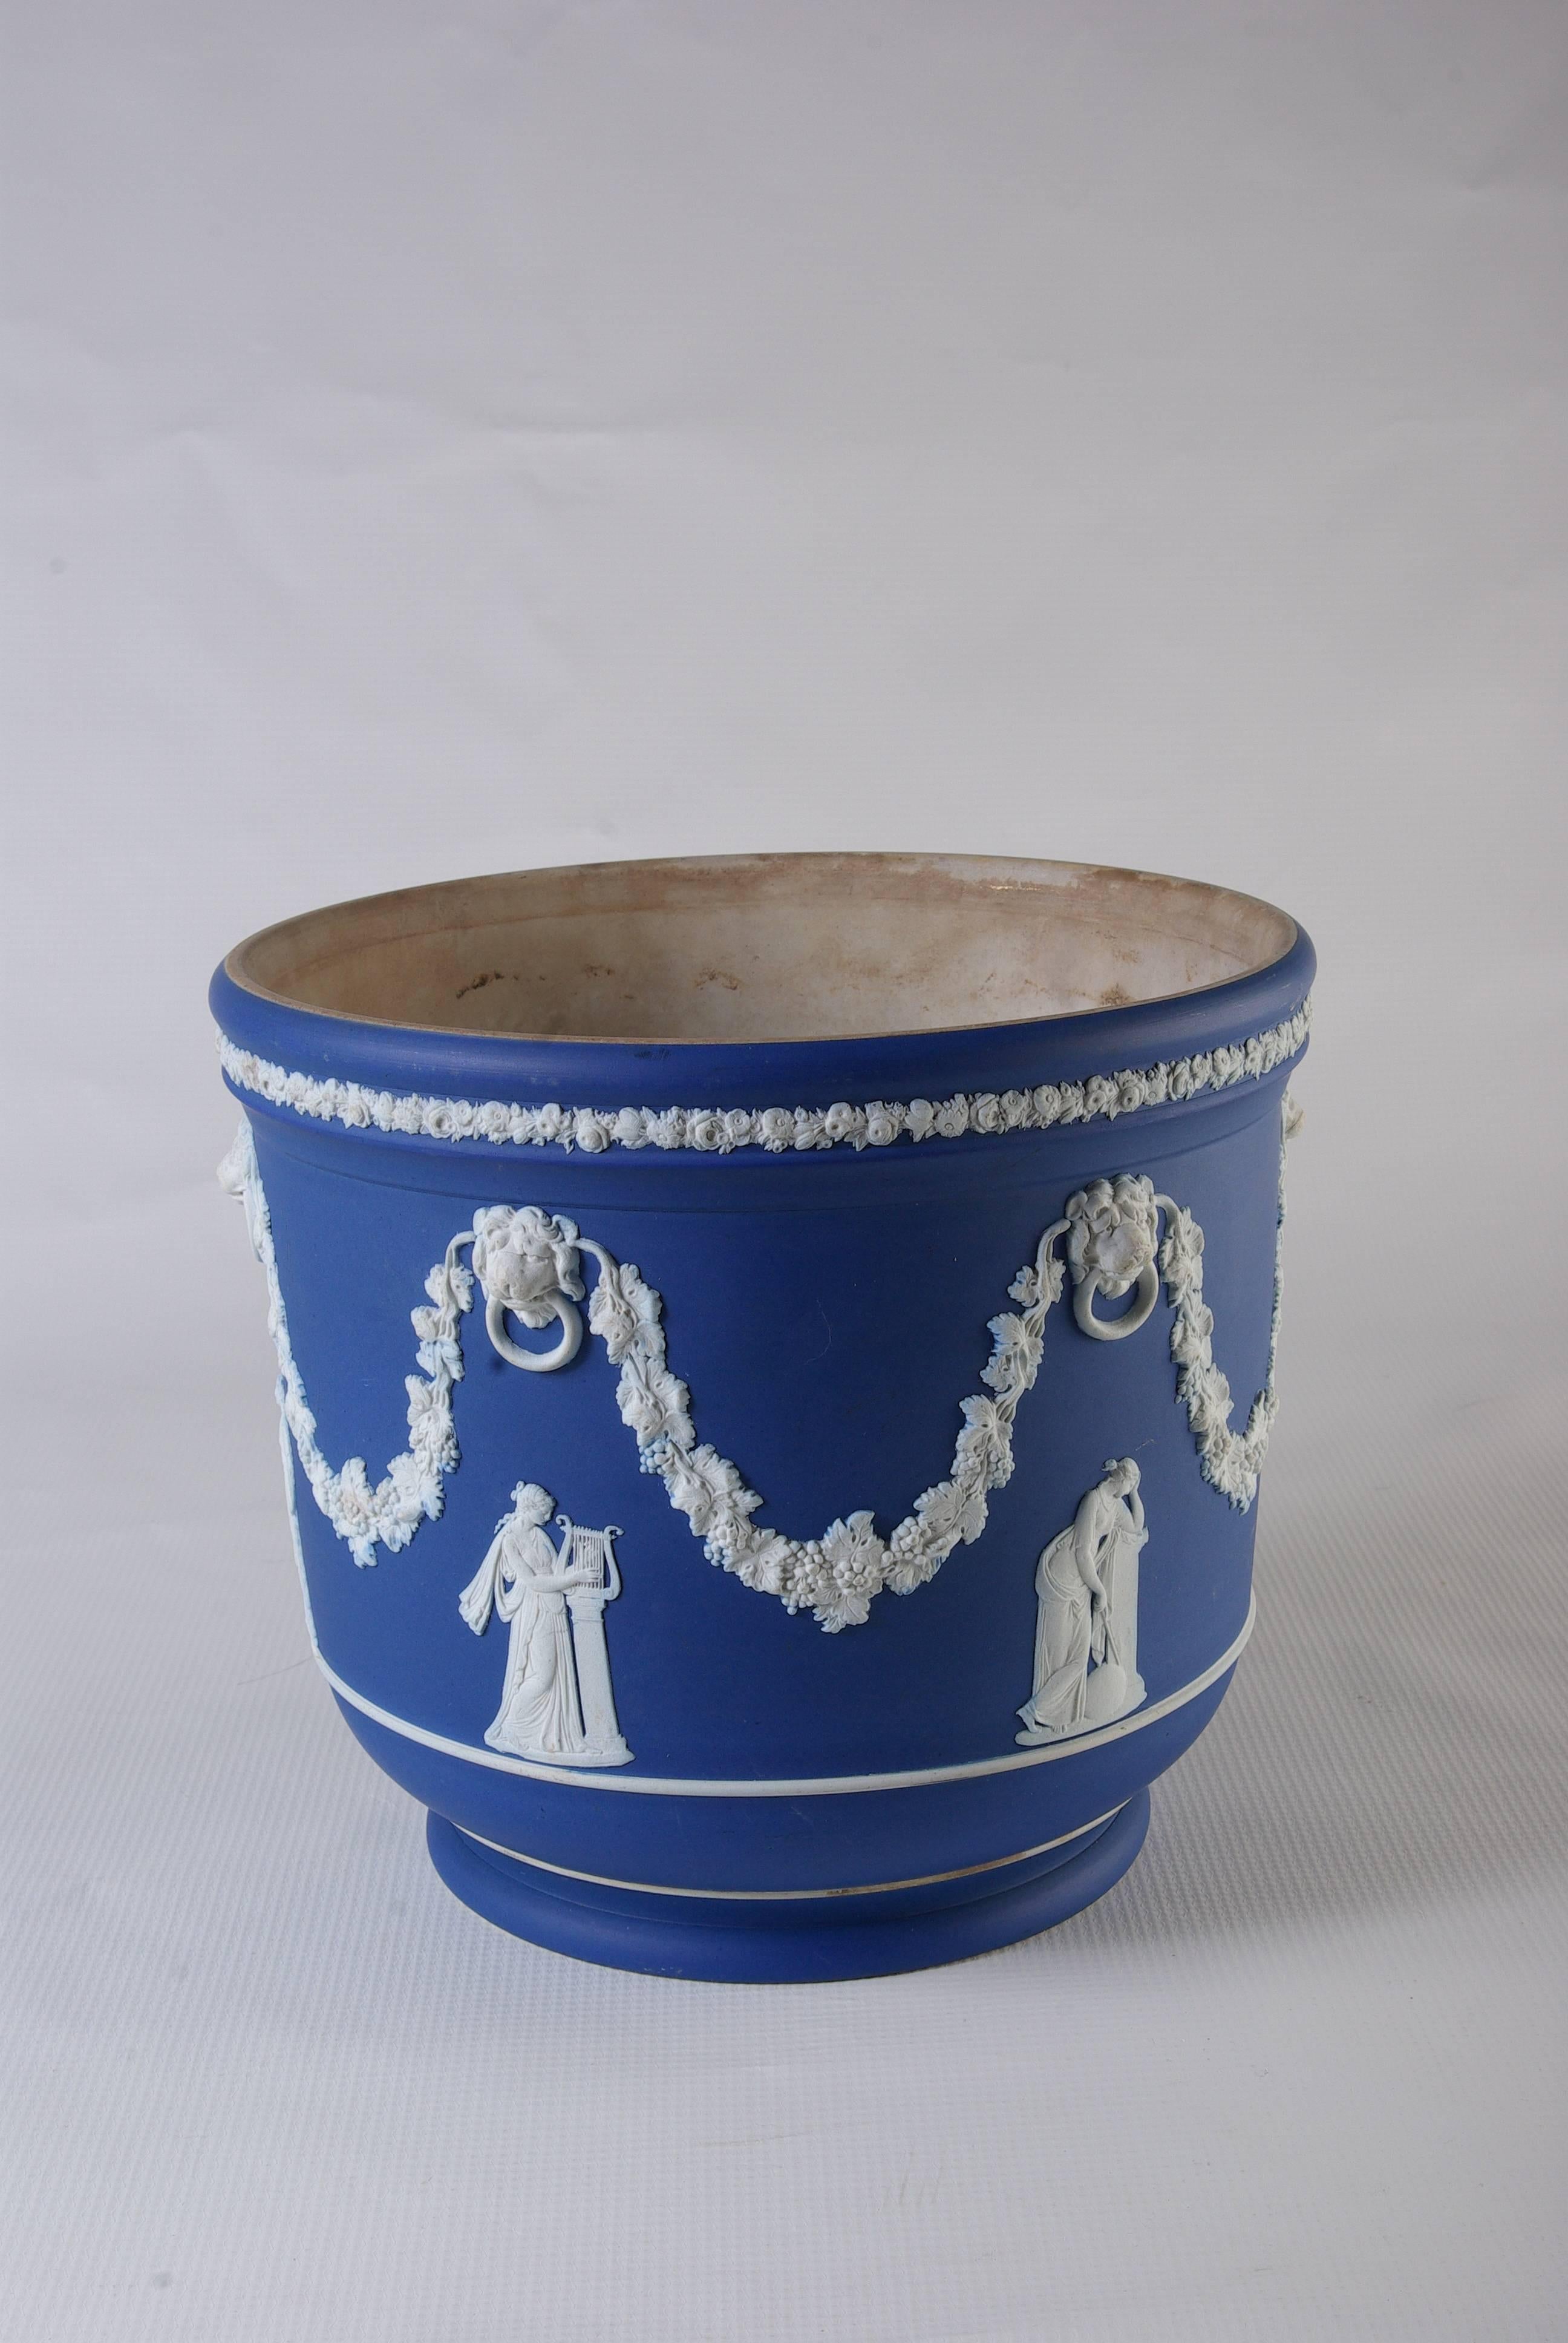 B-383F large Wedgwood jasperware jardiniere cache pot, white over cobalt blue.
Marked on underside Wedgwood, England.
Lions head with classical figures.
No losses to the decoration.
Some interior staining.
No chips, cracks or